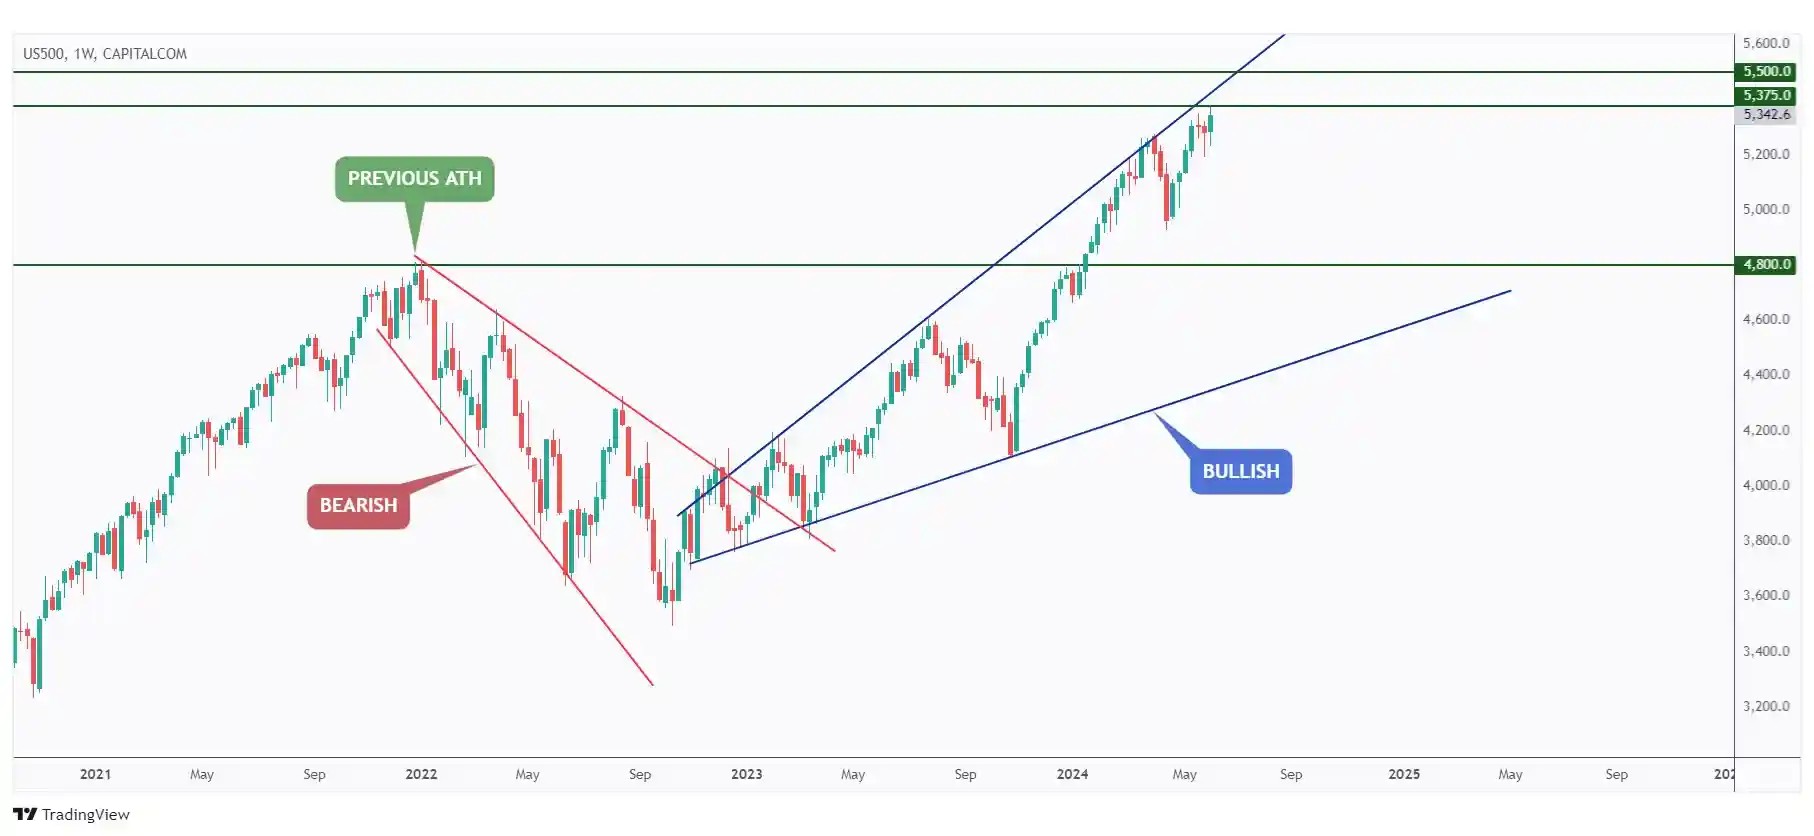 US500 weekly chart hovering around the upper bound of the wedge pattern and $5,500 resistance level.